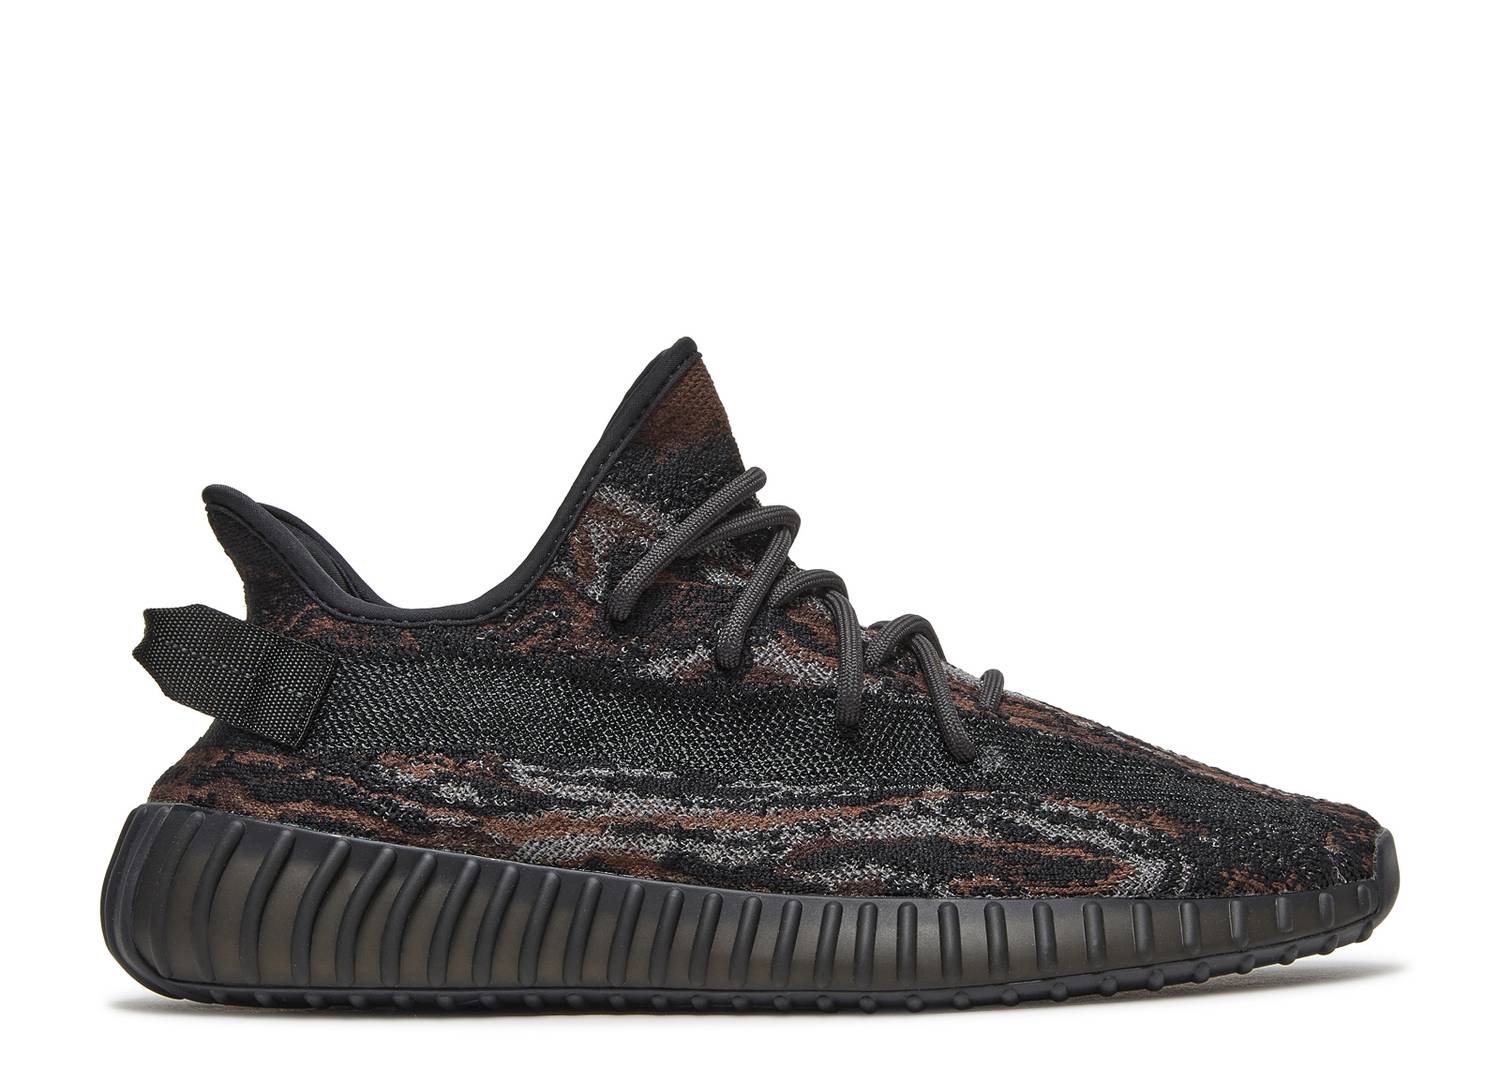 Yeezy Boost 350 adidas travel complaints department store hours free